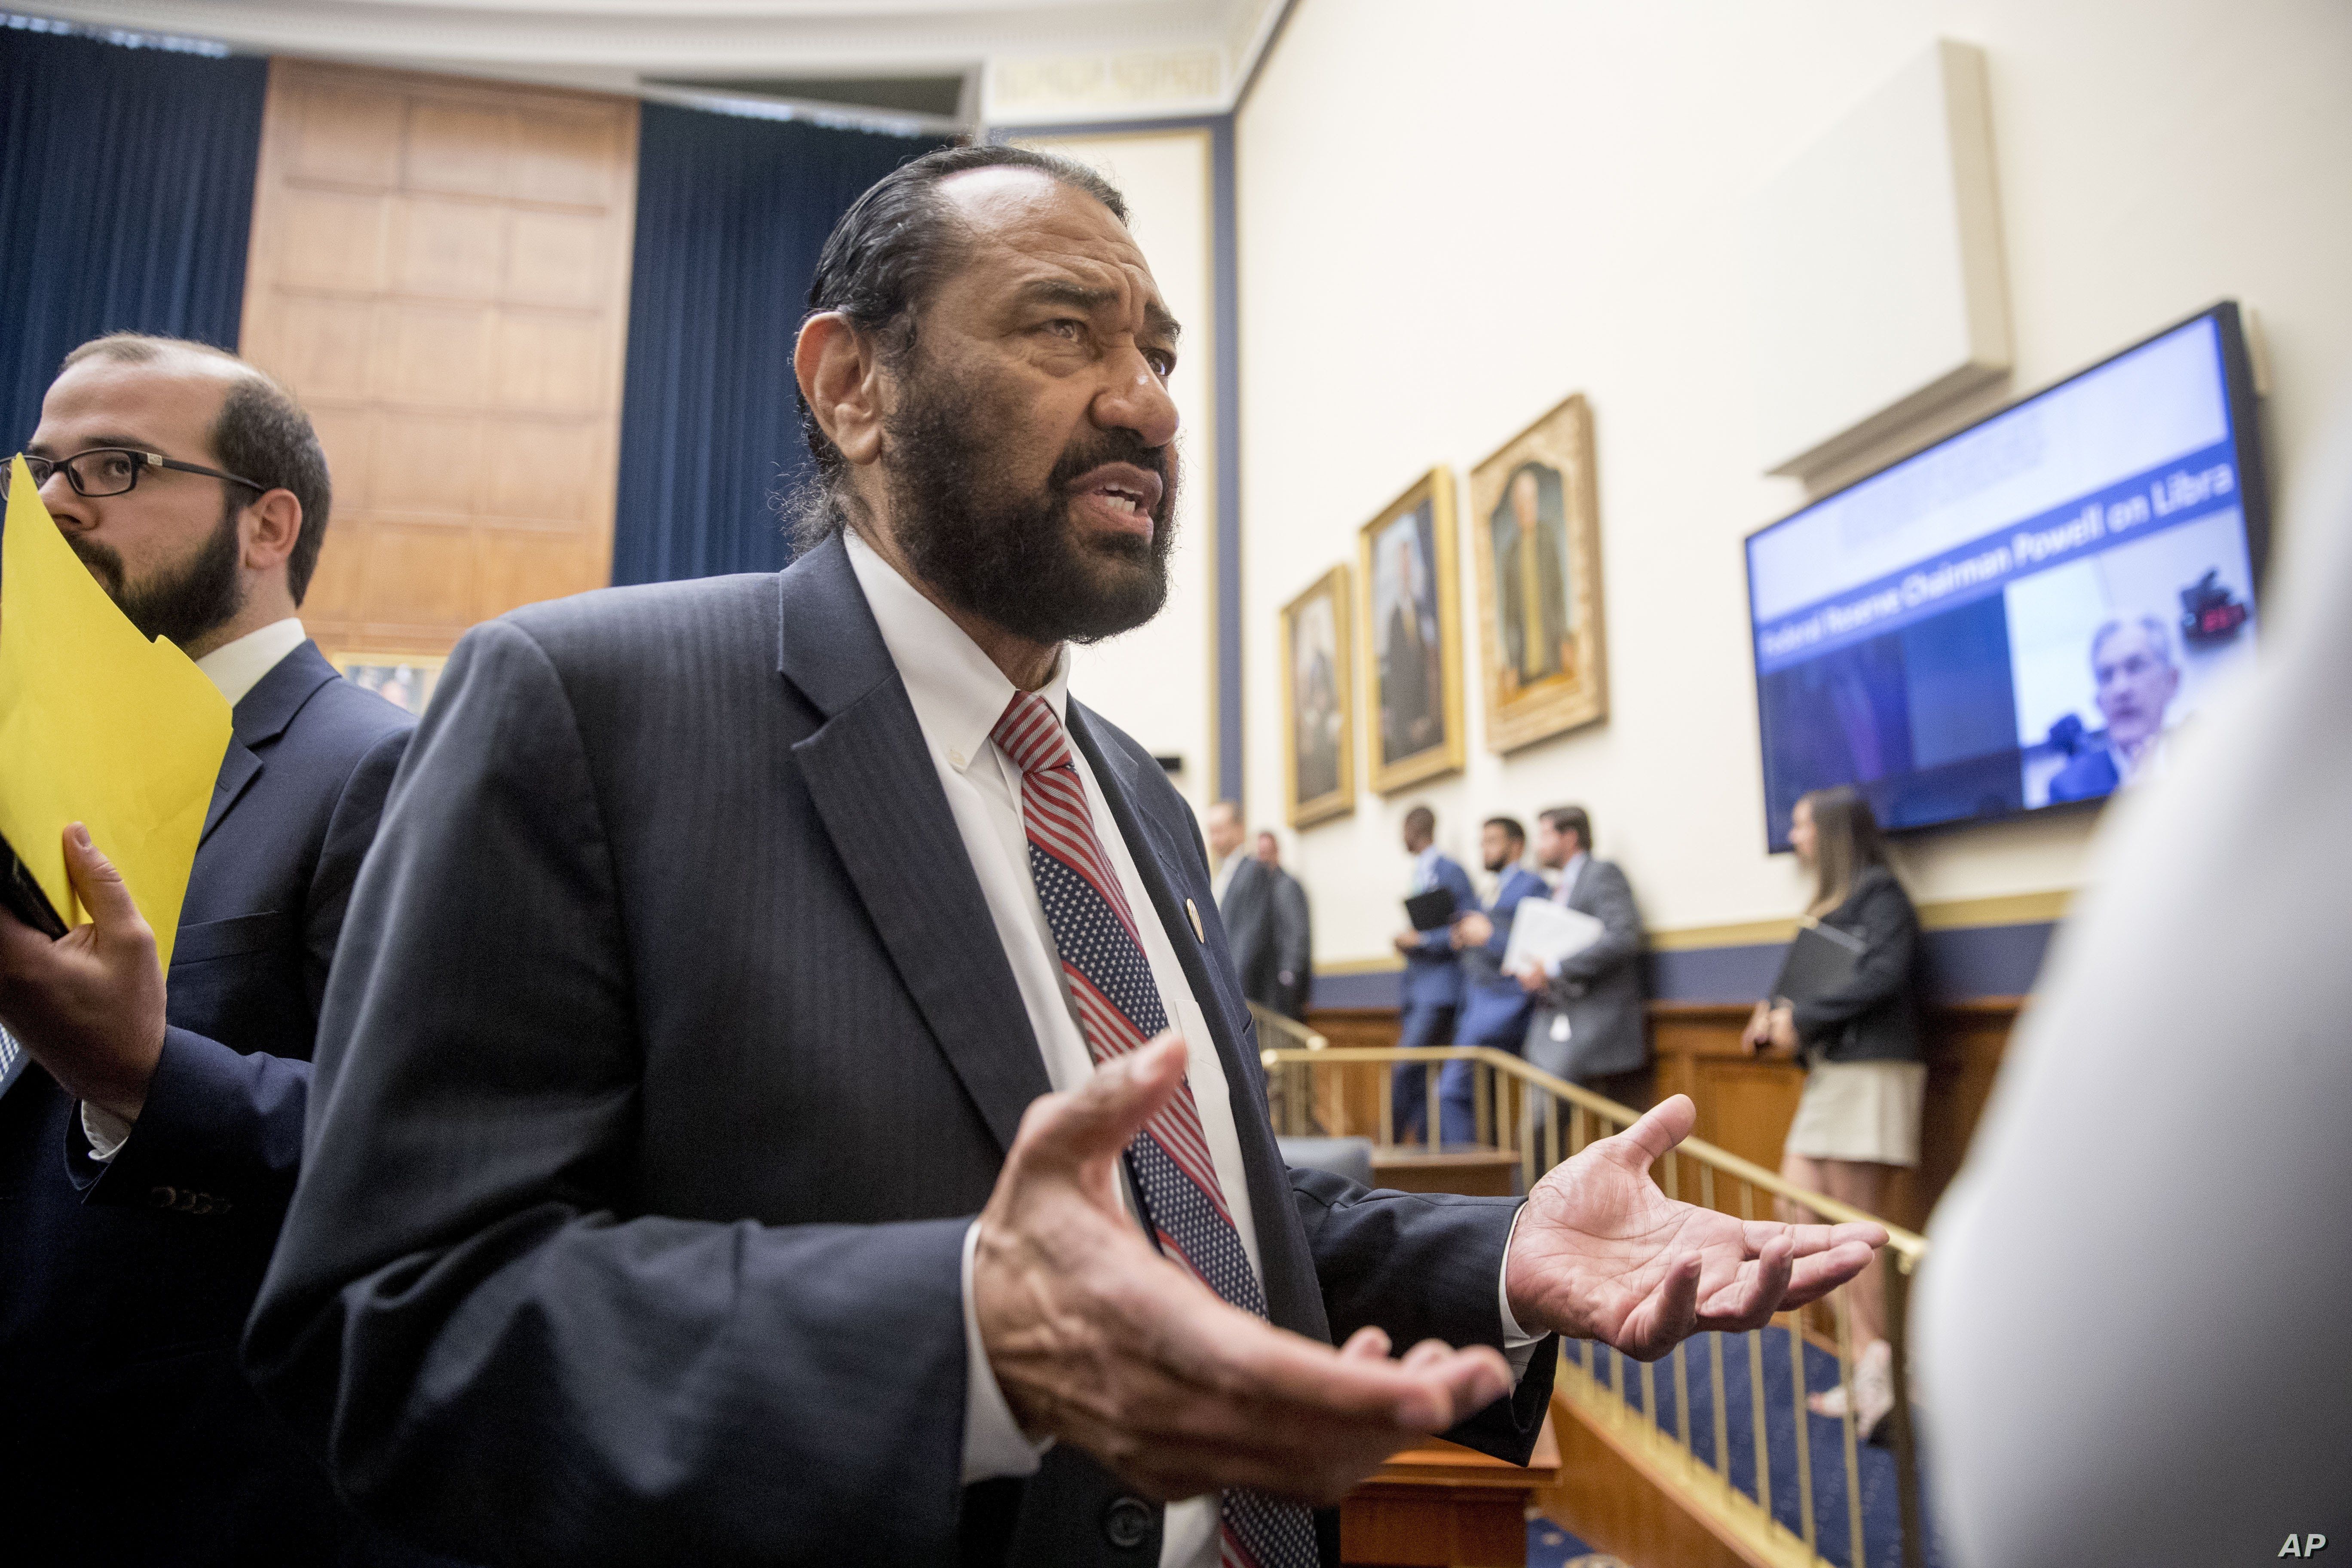  Rep. Al Green, D-Texas, right, speaks to visitors during a break from testimony before a House Financial Services Committee on Capitol Hill in Washington, July 17, 2019. Green has introduced a resolution in the House to impeach President Donald Trump.